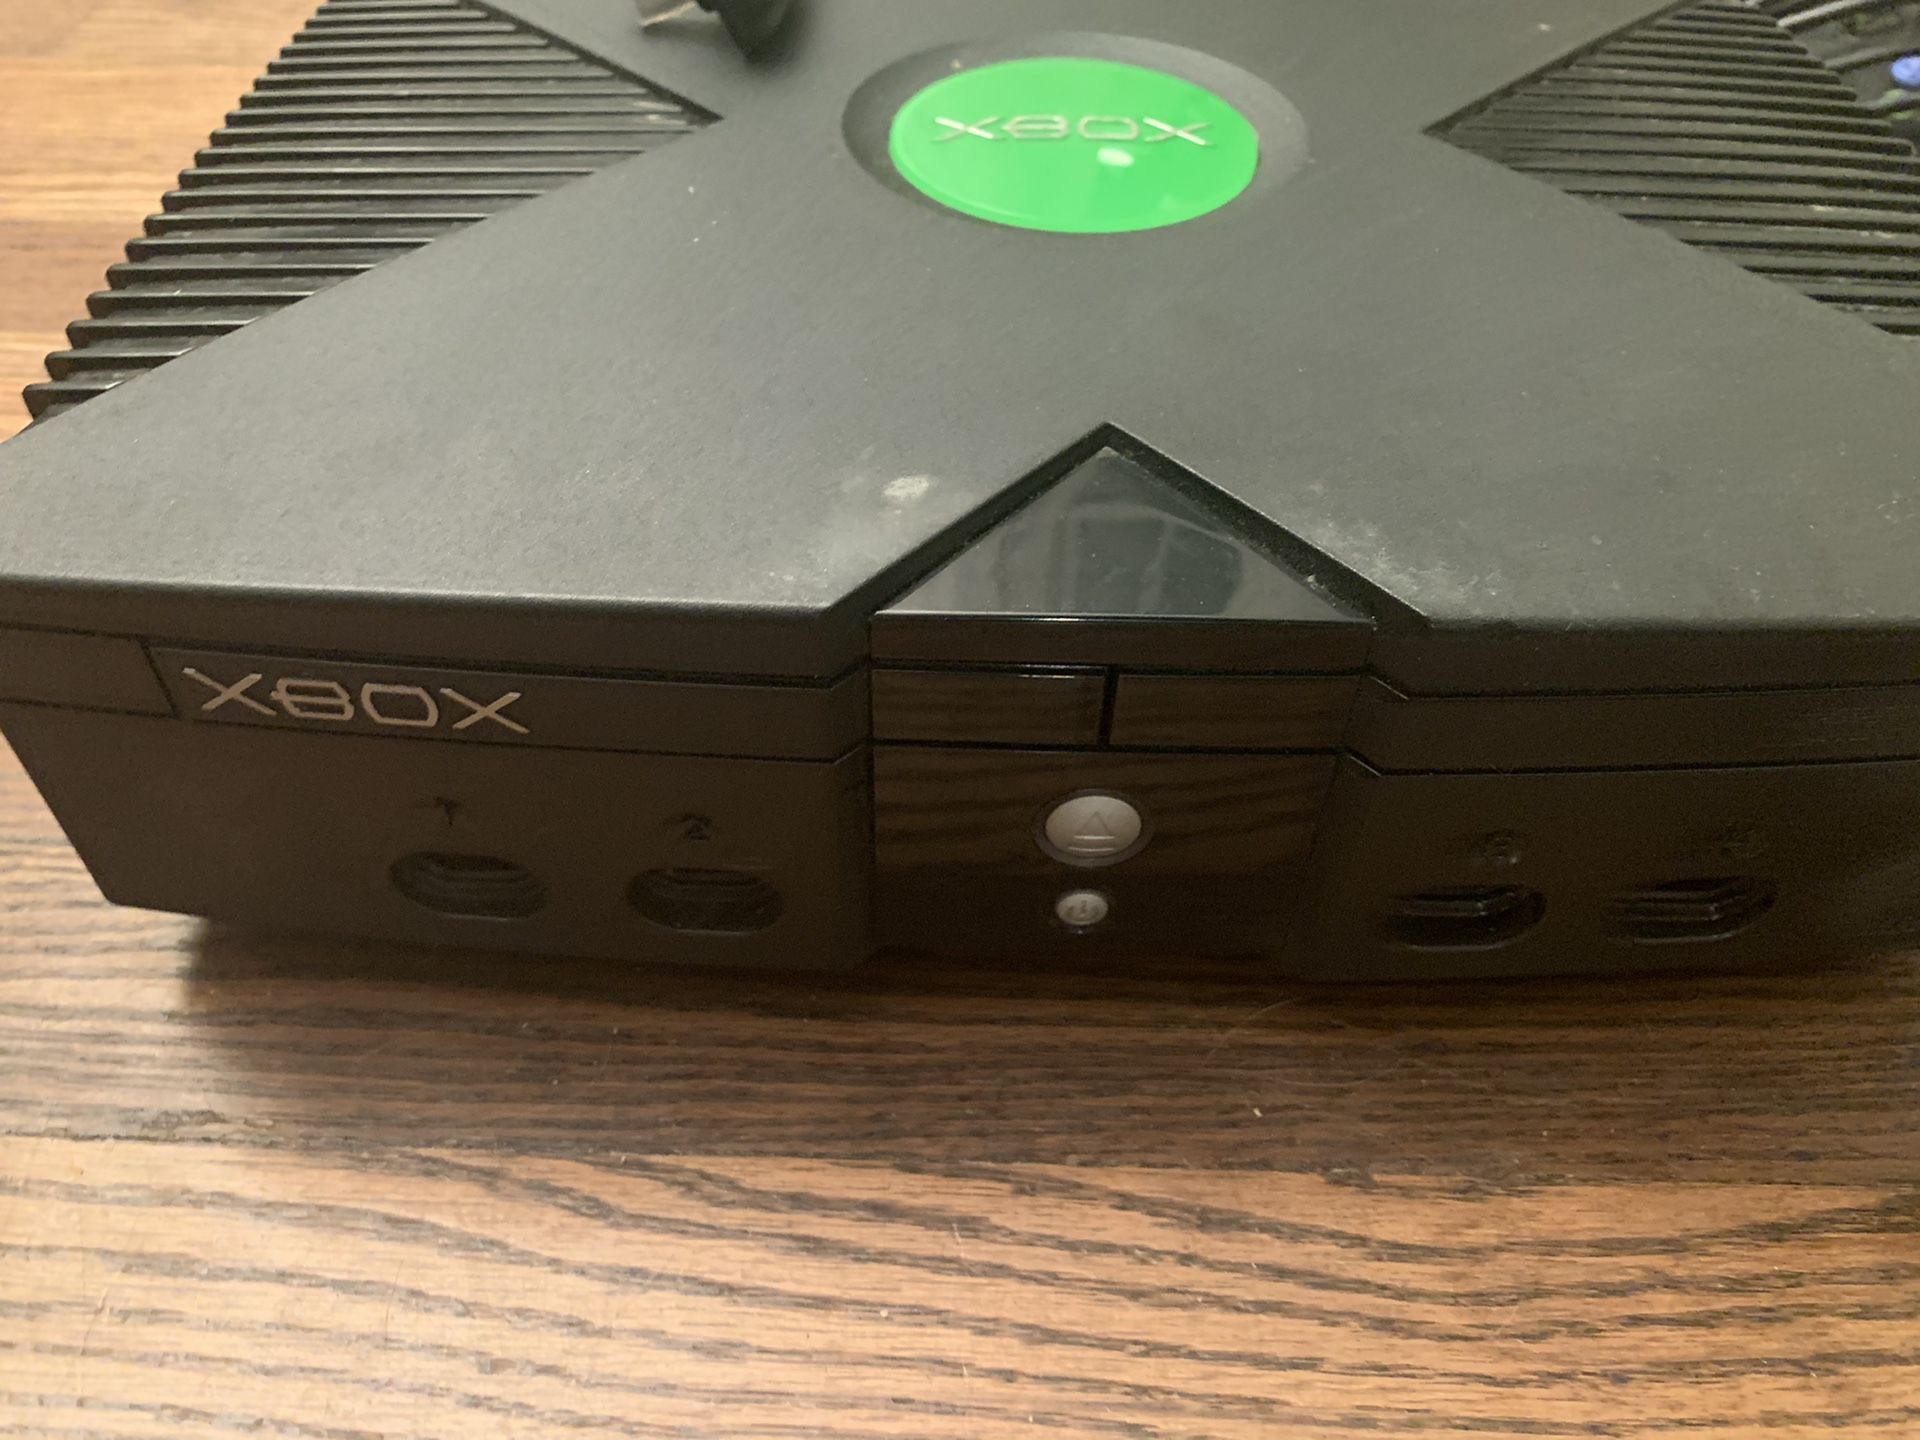 Xbox (original) with 4 working controllers